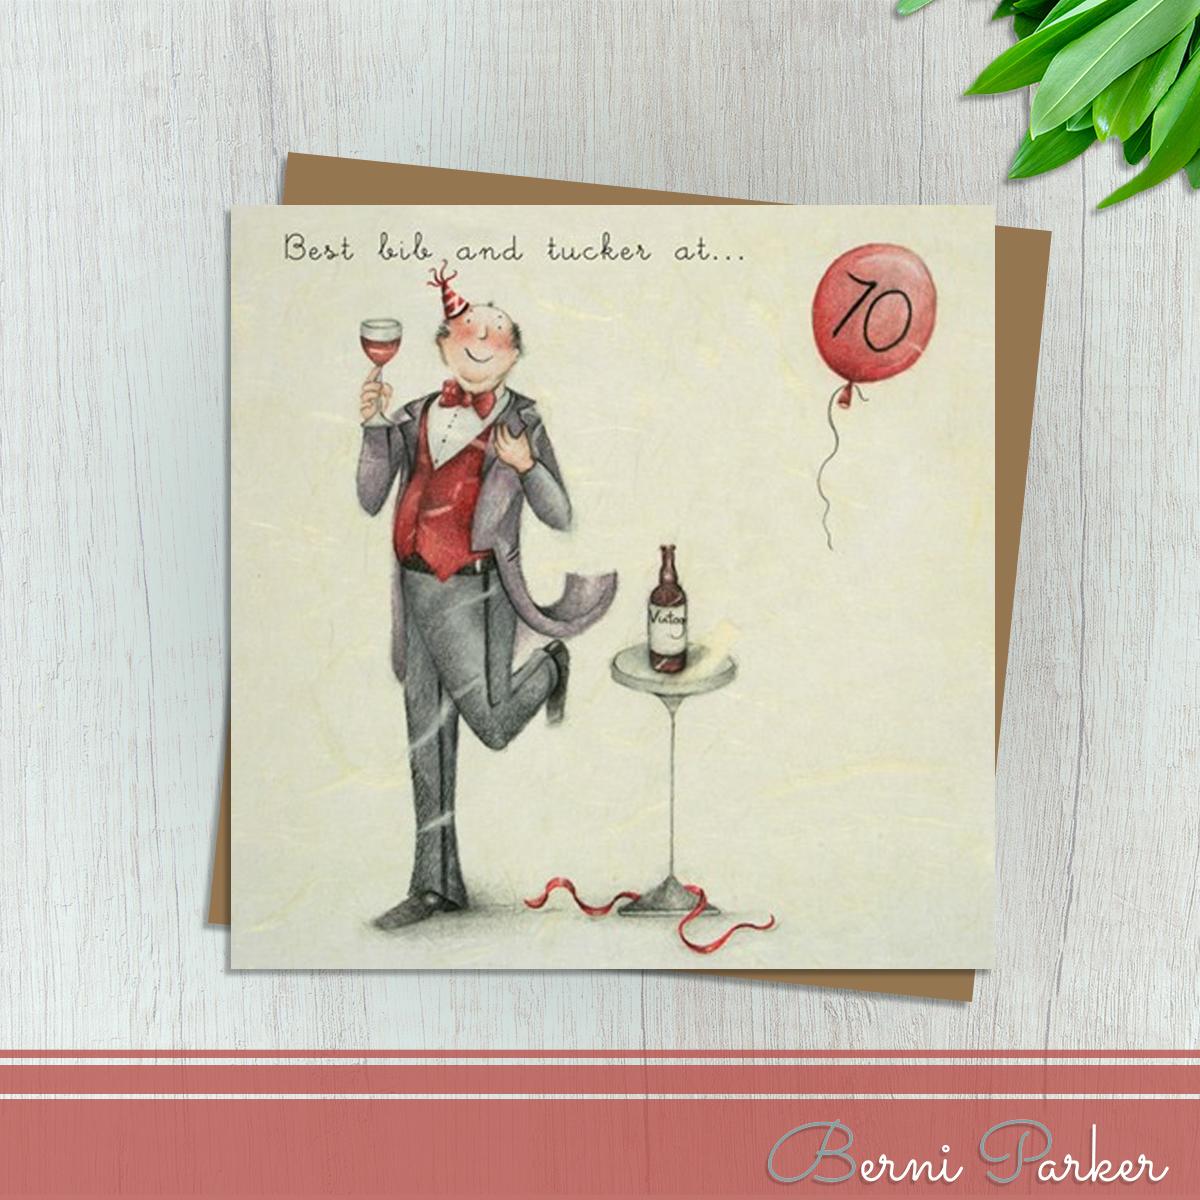 Showing A Man Dressed In Tails With A Glass Of Vintage Red Wine And A 70 Balloon. Caption: Best Bib And Tucker At 70. Blank Inside For Your Own Message. Complete With Brown Kraft Envelope